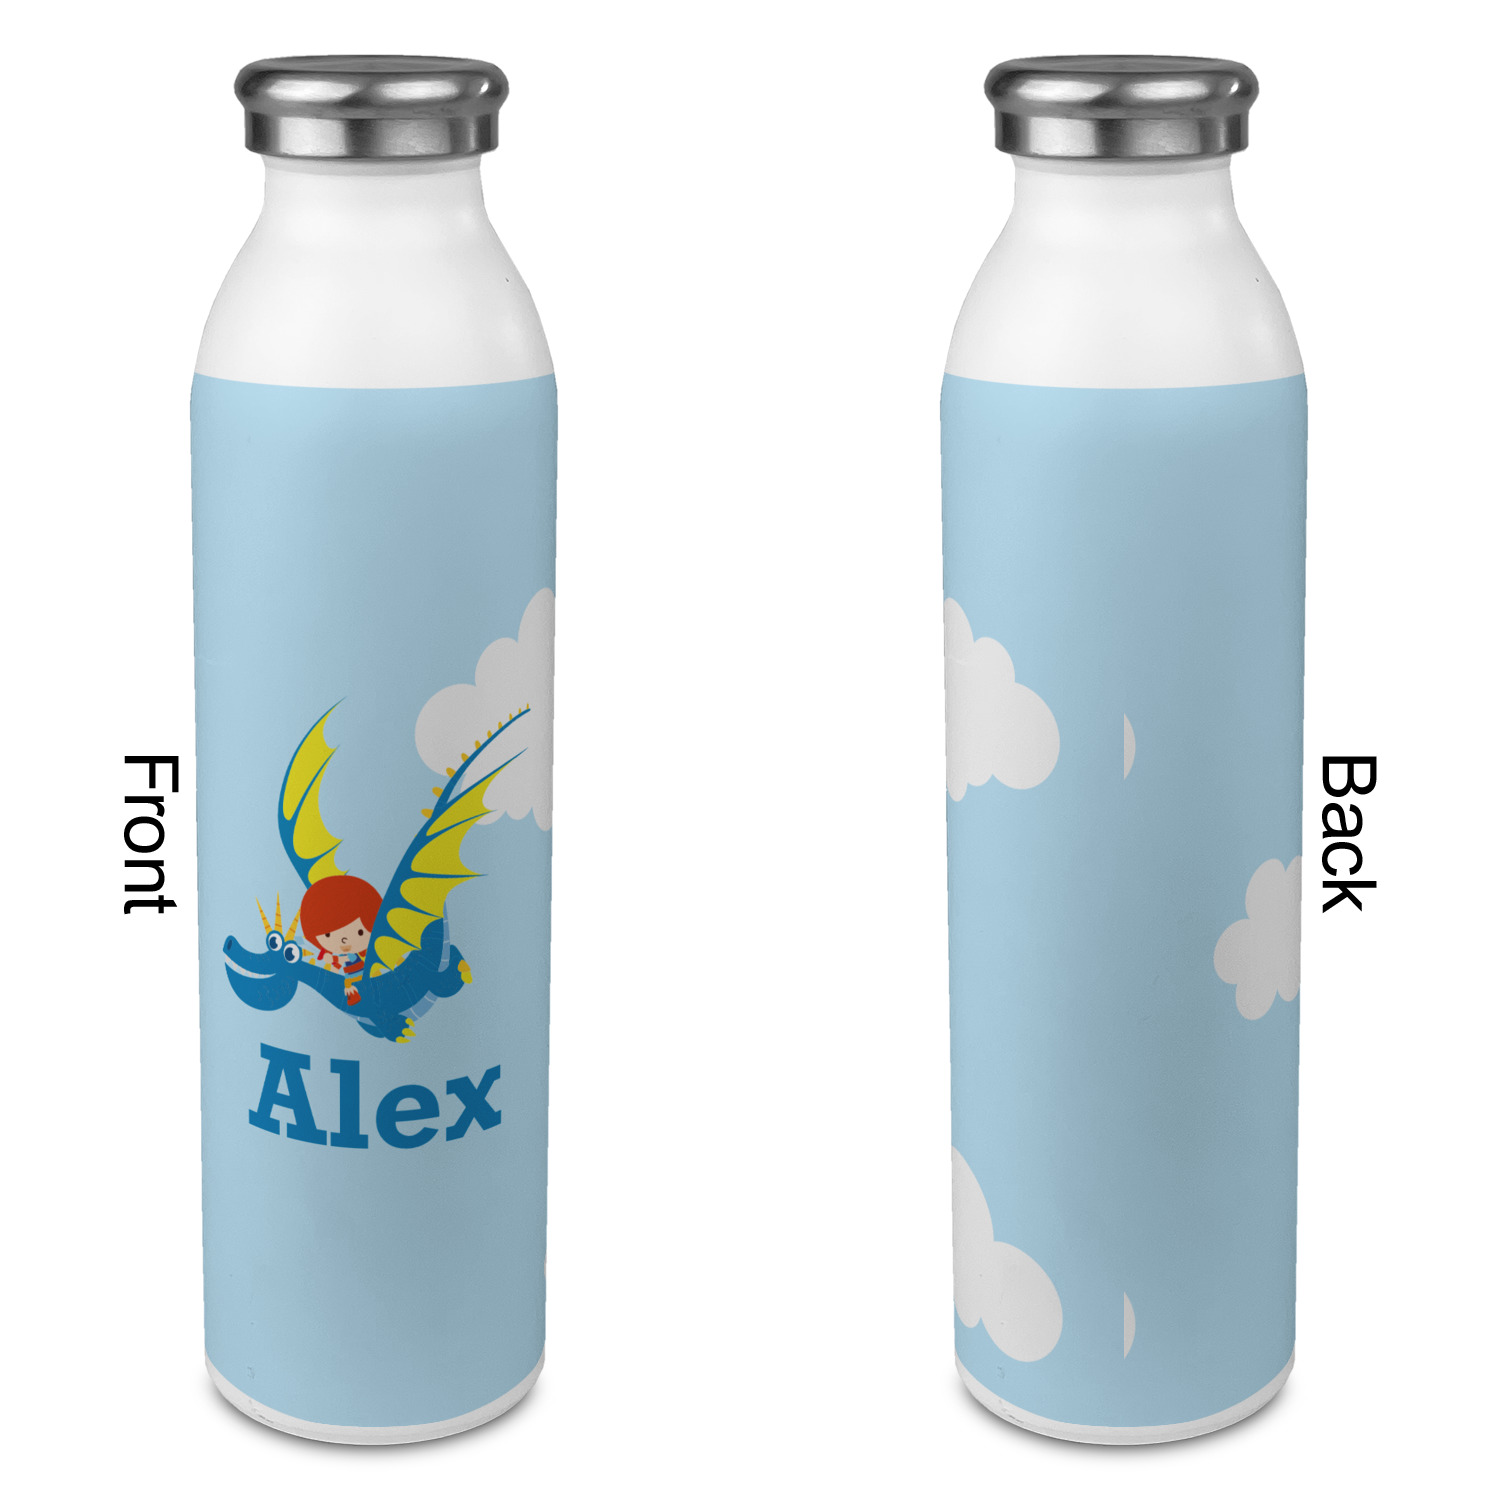 https://www.youcustomizeit.com/common/MAKE/203846/Flying-a-Dragon-20oz-Water-Bottles-Full-Print-Approval.jpg?lm=1665528415